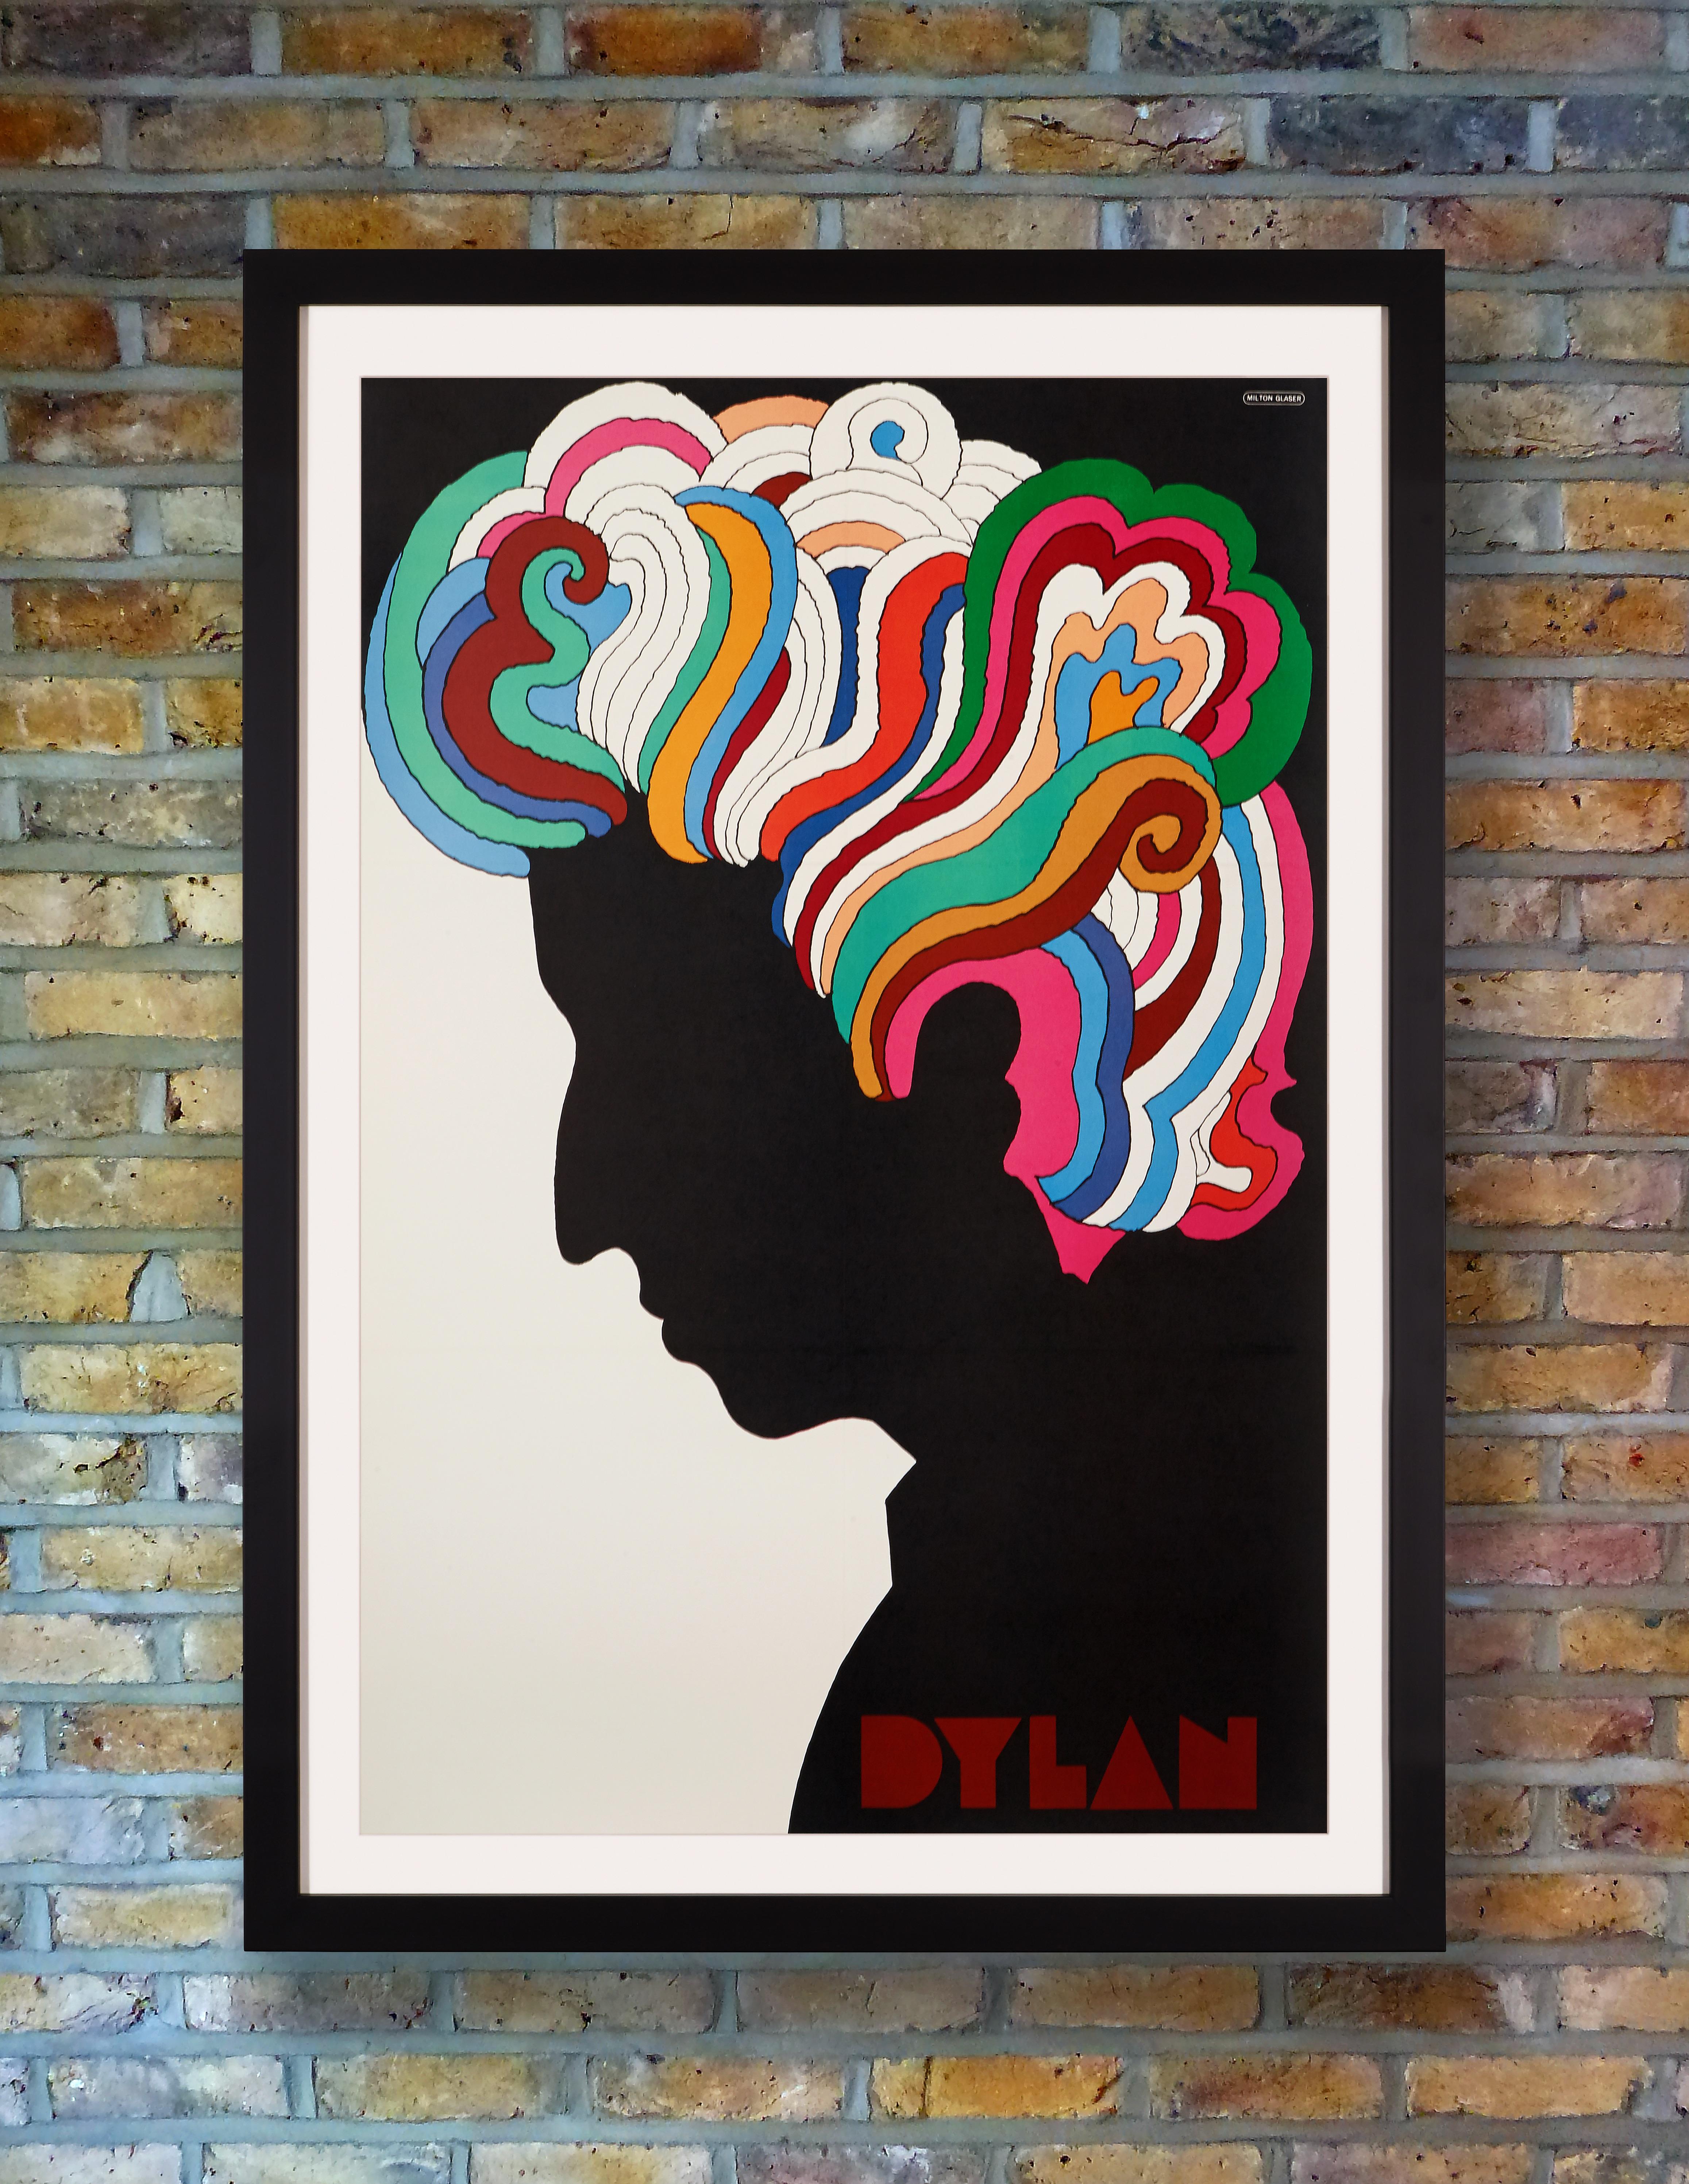 One of America's most celebrated graphic designers and creator of the I (HEART) NY logo, Milton Glaser was commissioned by Columbia Records to design a bonus insert poster for inclusion with the 1967 vinyl release of 'Bob Dylan's Greatest Hits.'